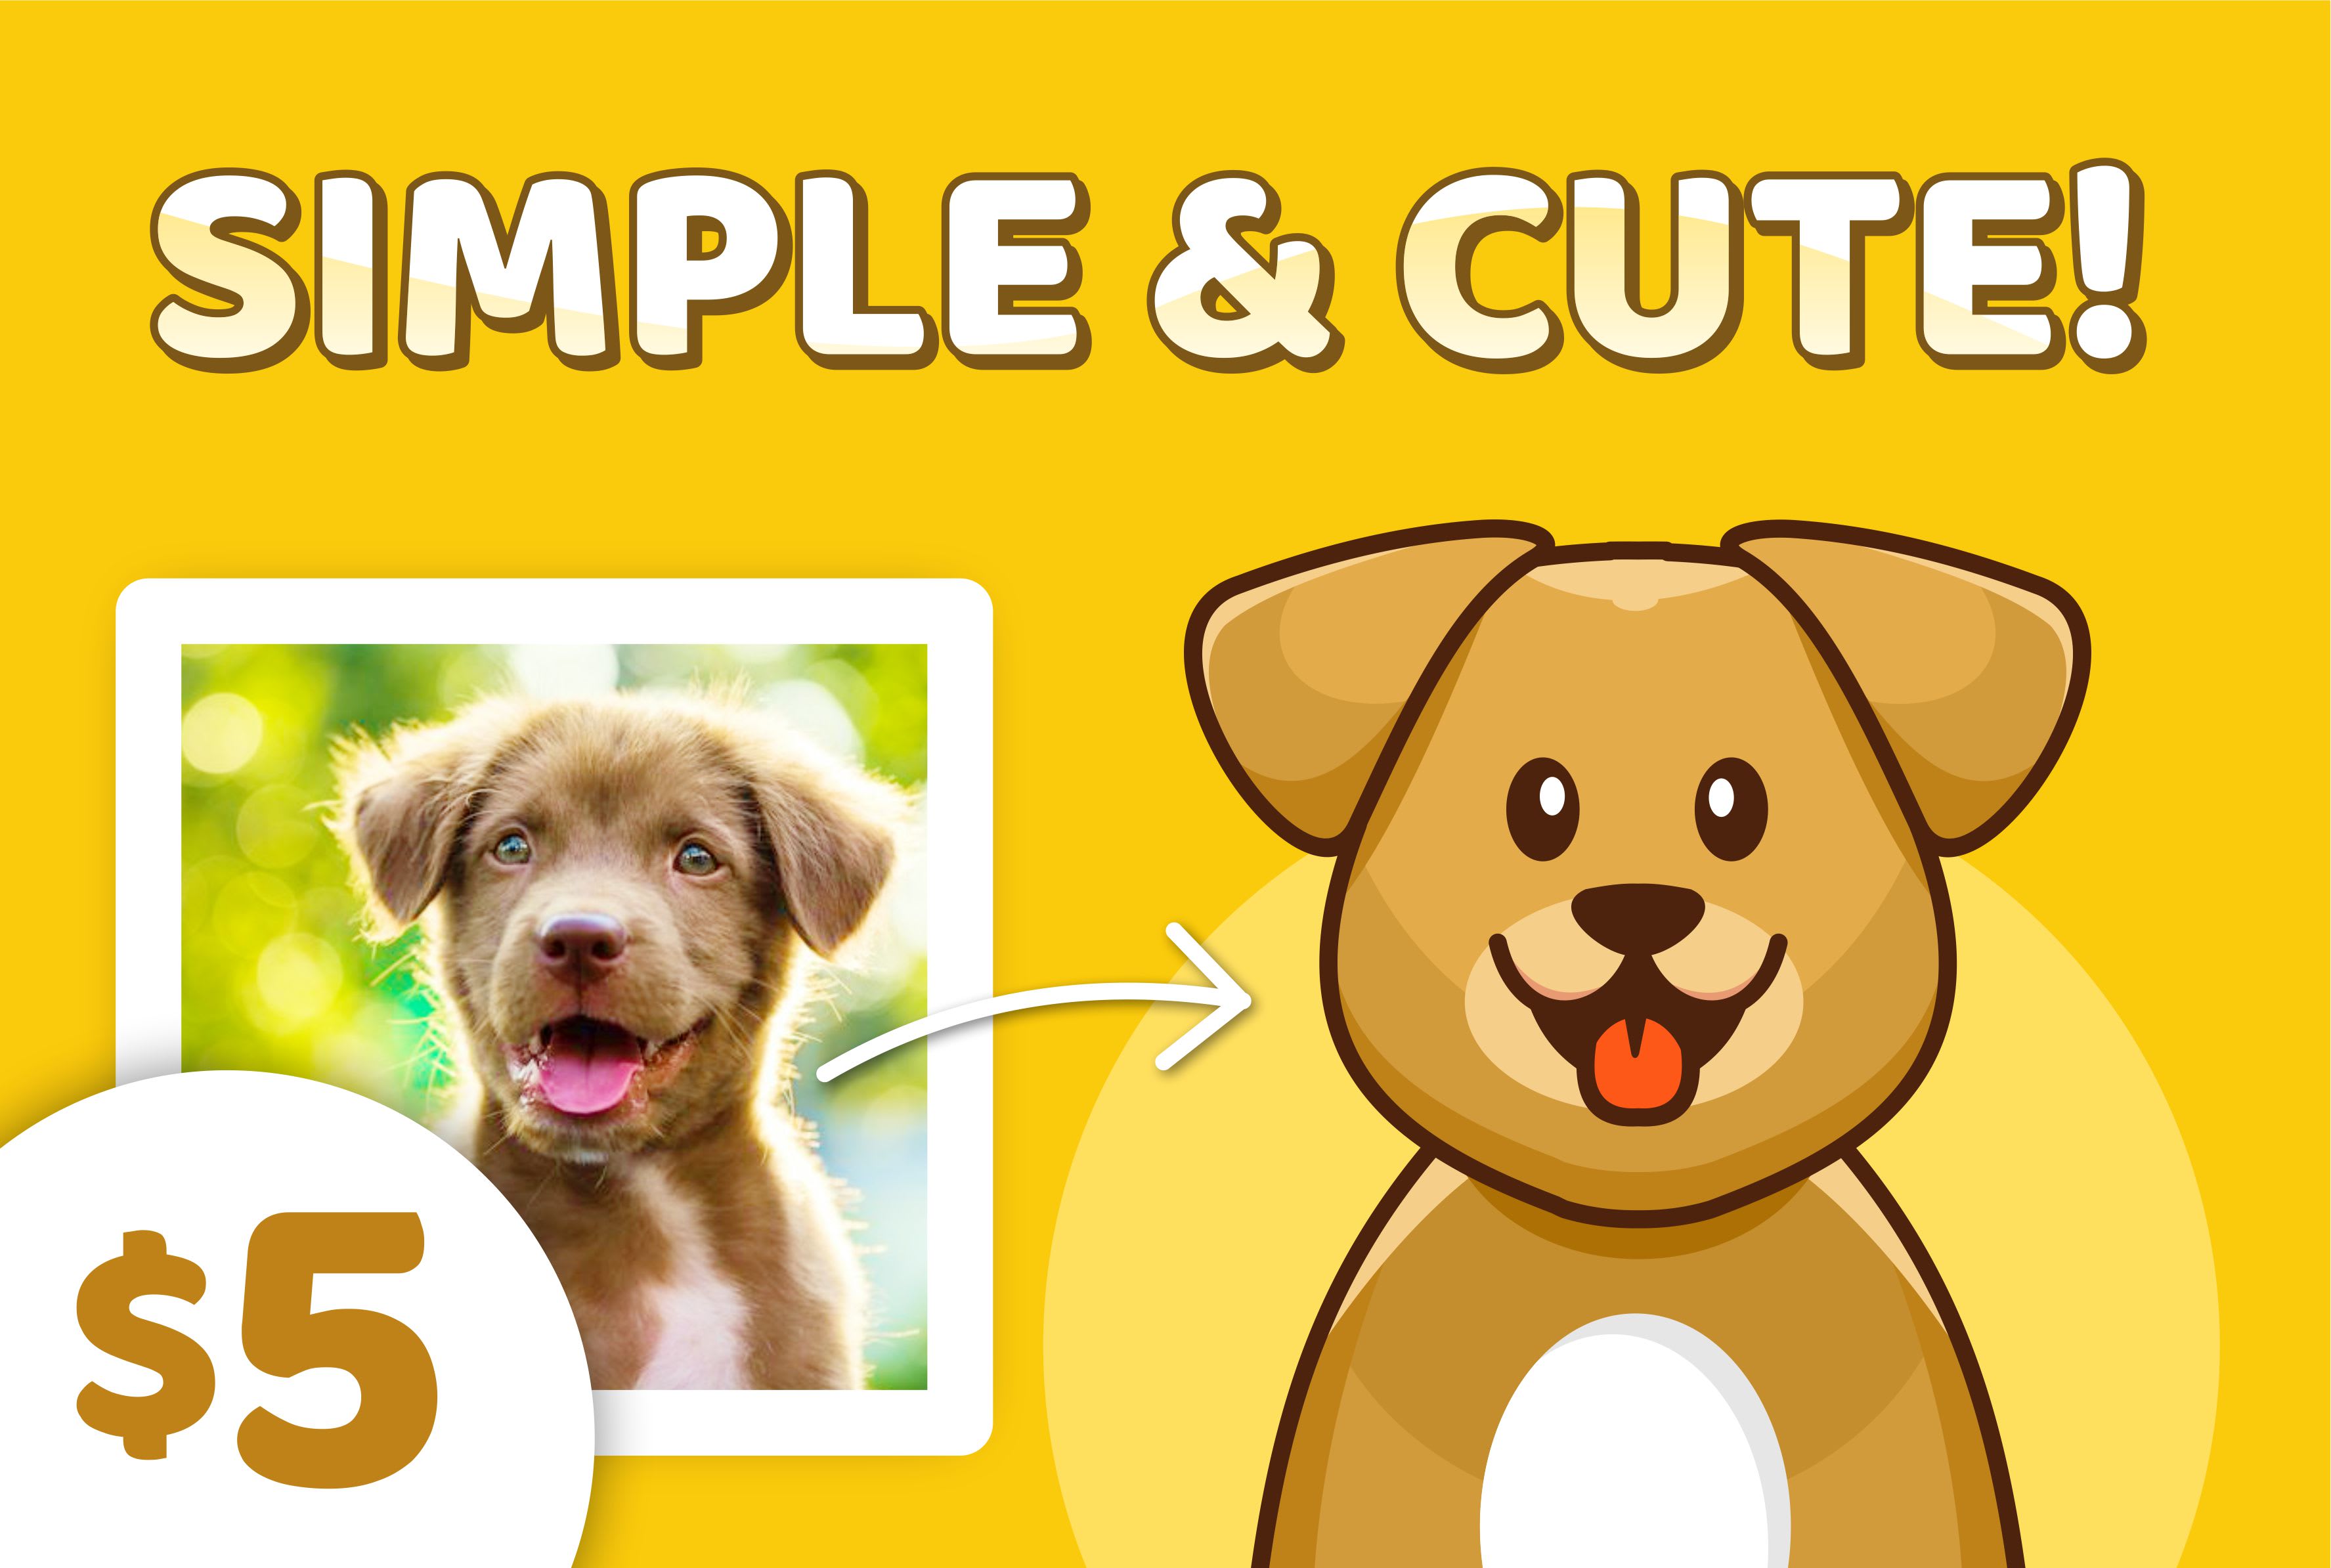 Draw cute simple cartoon illustration for pet or any animals by Suranious |  Fiverr